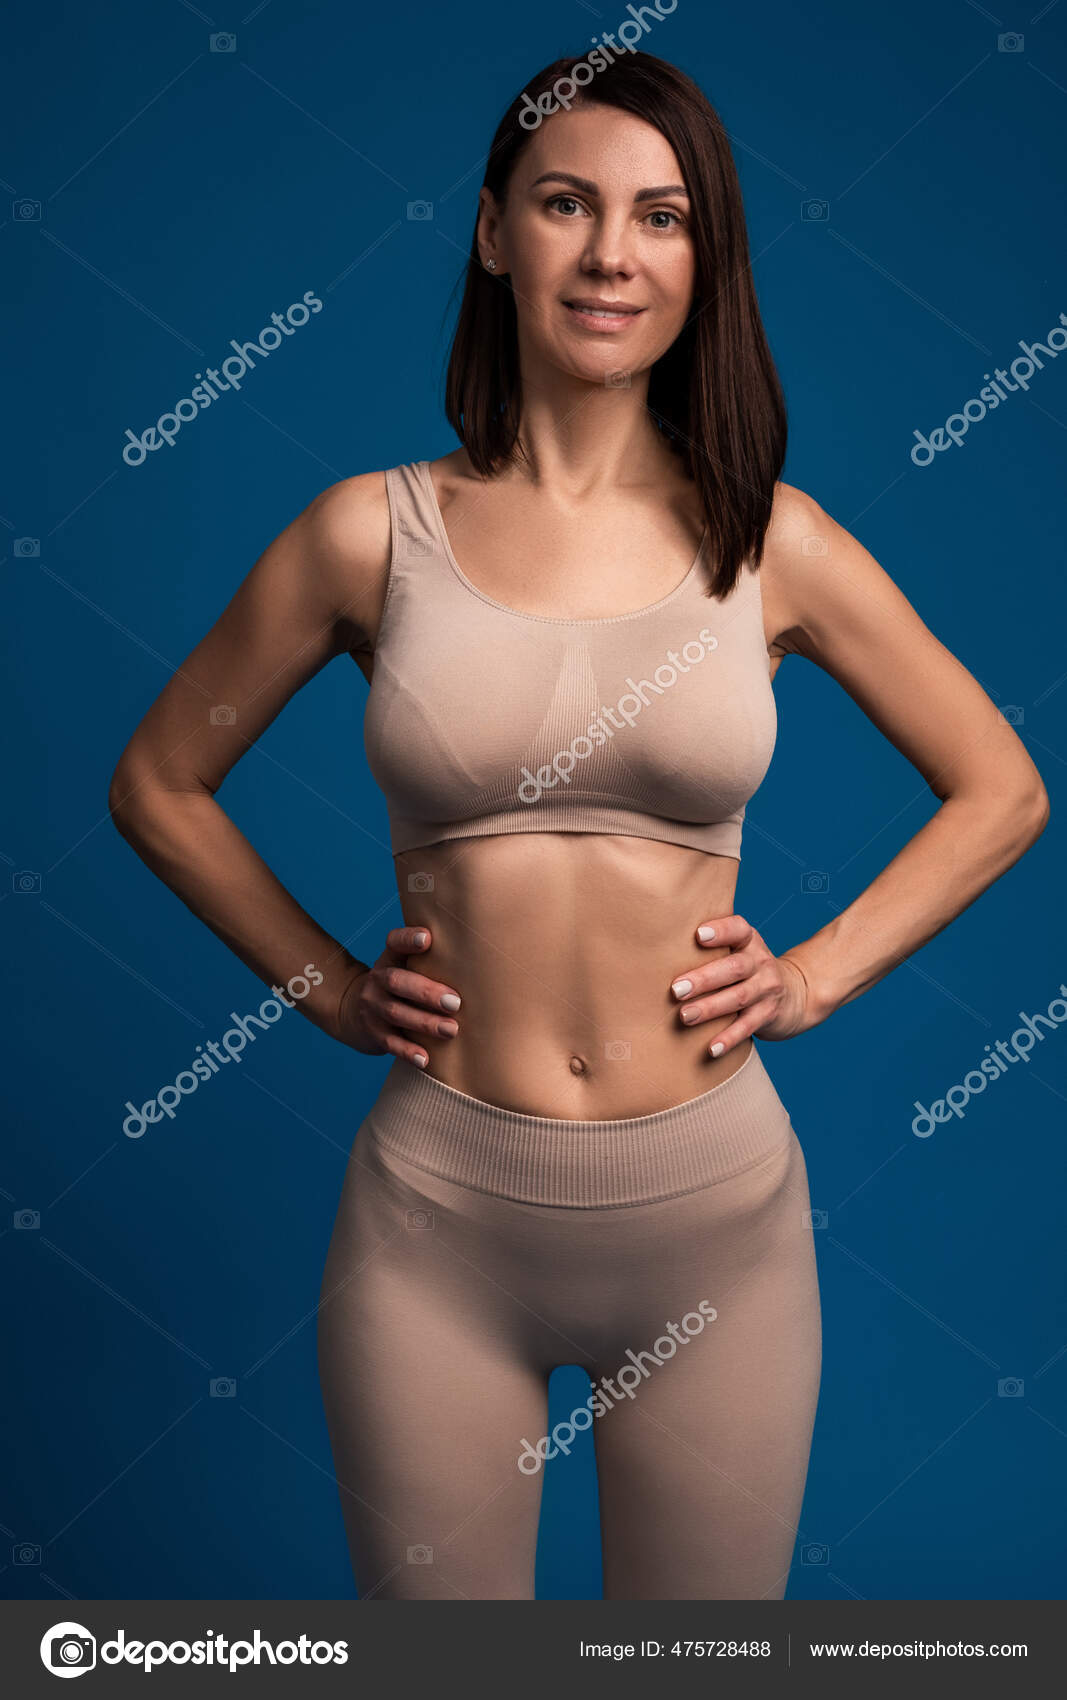 Front view of slim blonde woman with her arms akimbo as full body